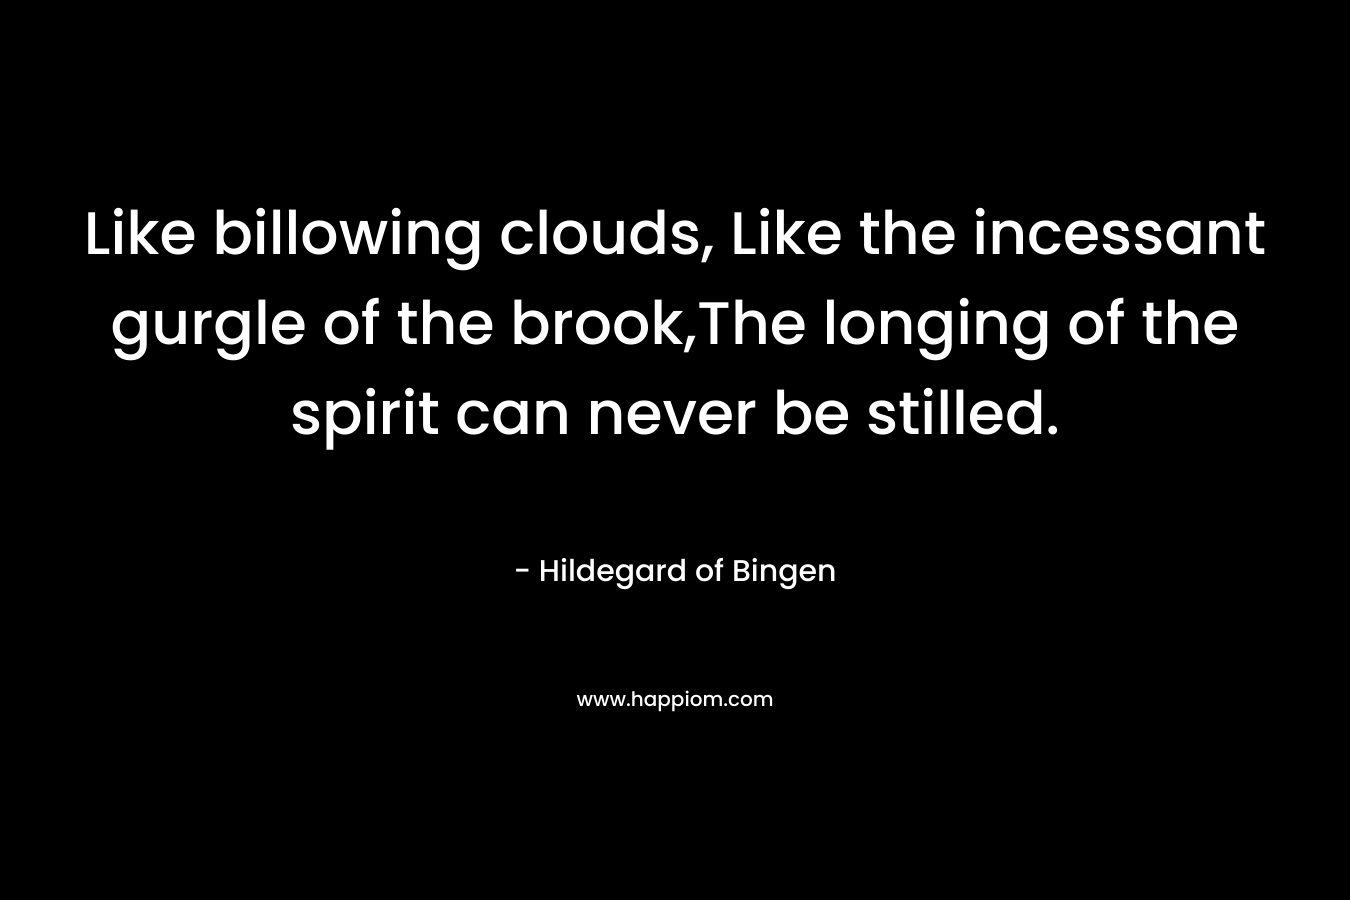 Like billowing clouds, Like the incessant gurgle of the brook,The longing of the spirit can never be stilled. – Hildegard of Bingen